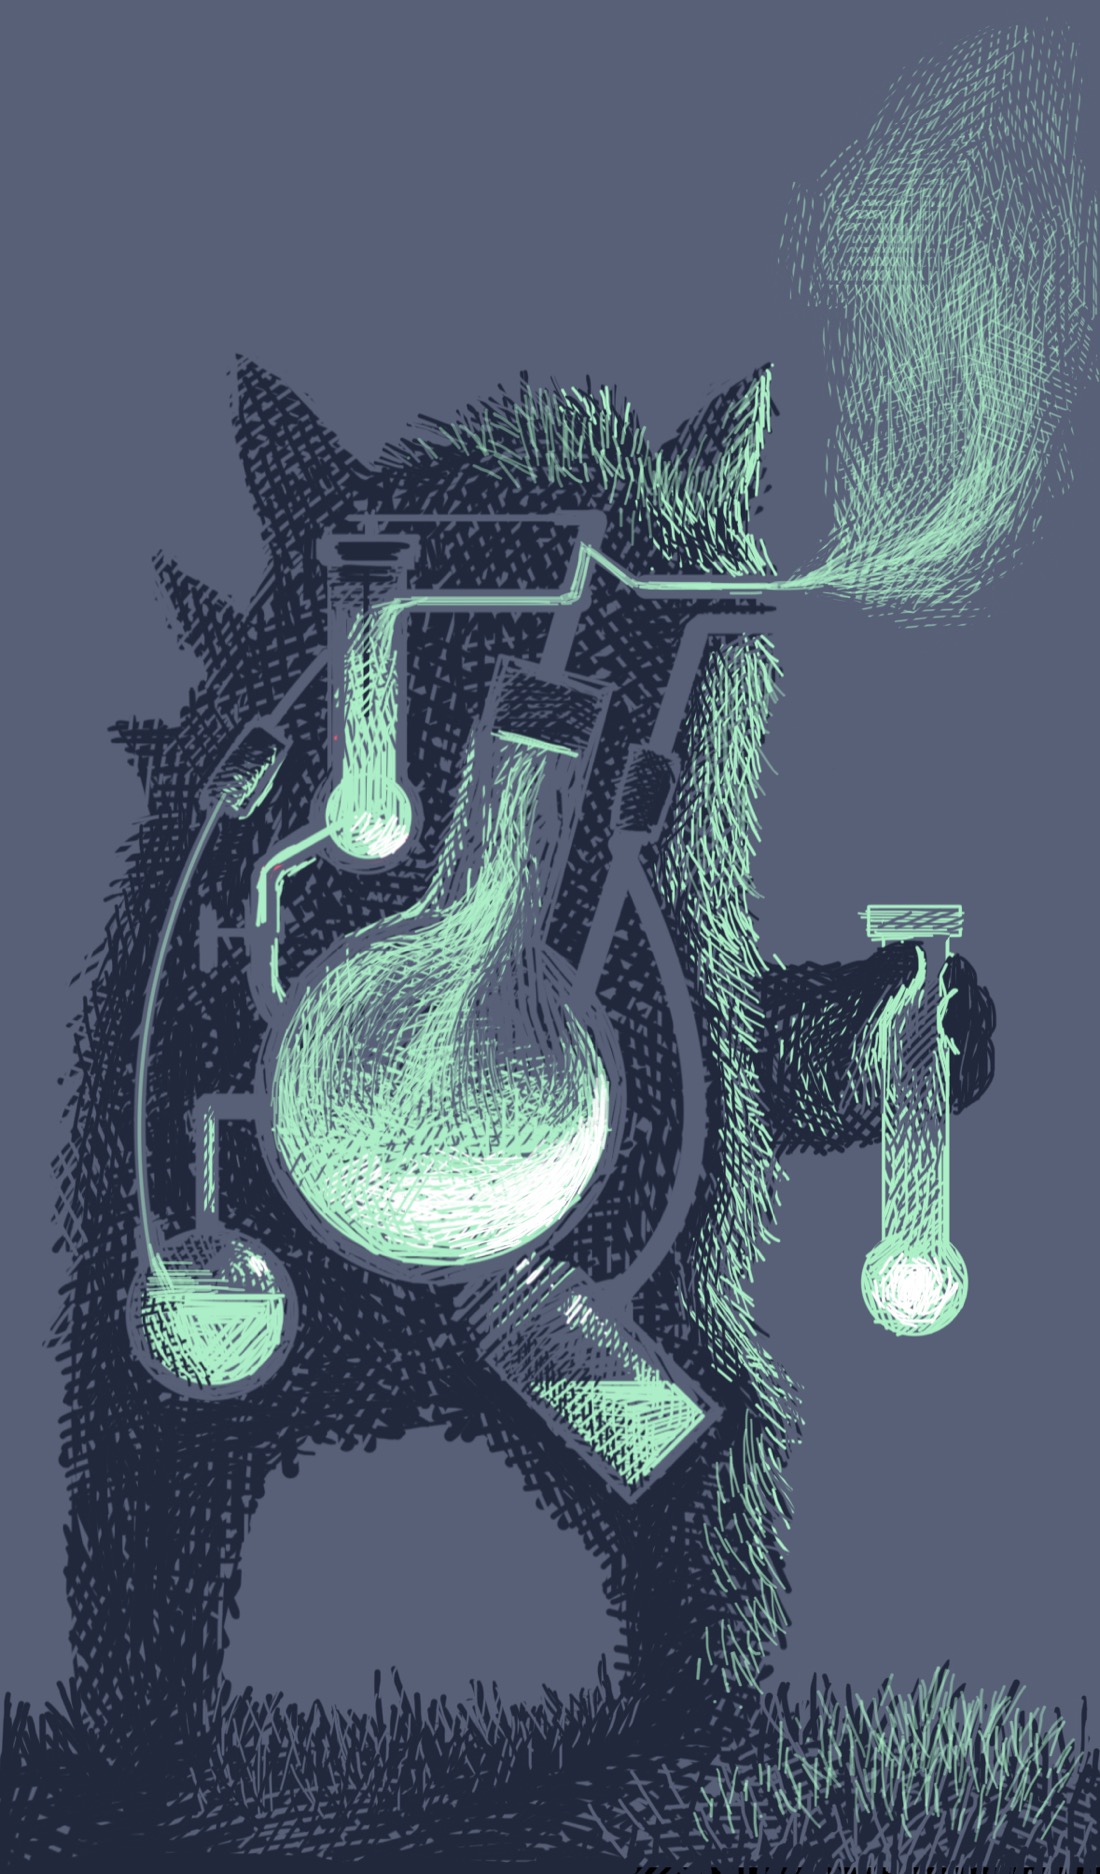 A two legged creature with horns and/or pointed ears stands in the grass. It seems as though the interior of the creature is visible, perhaps a cutaway view, like a biological diagram. This cutaway view obscures the creatures face. Inside the creature are various beakers and tubes containing glowing green liquid, connected by piping. The creature holds a test tube with the same glowing liquid in one of its hands. The overall effect is of a furry, walking chemistry set.